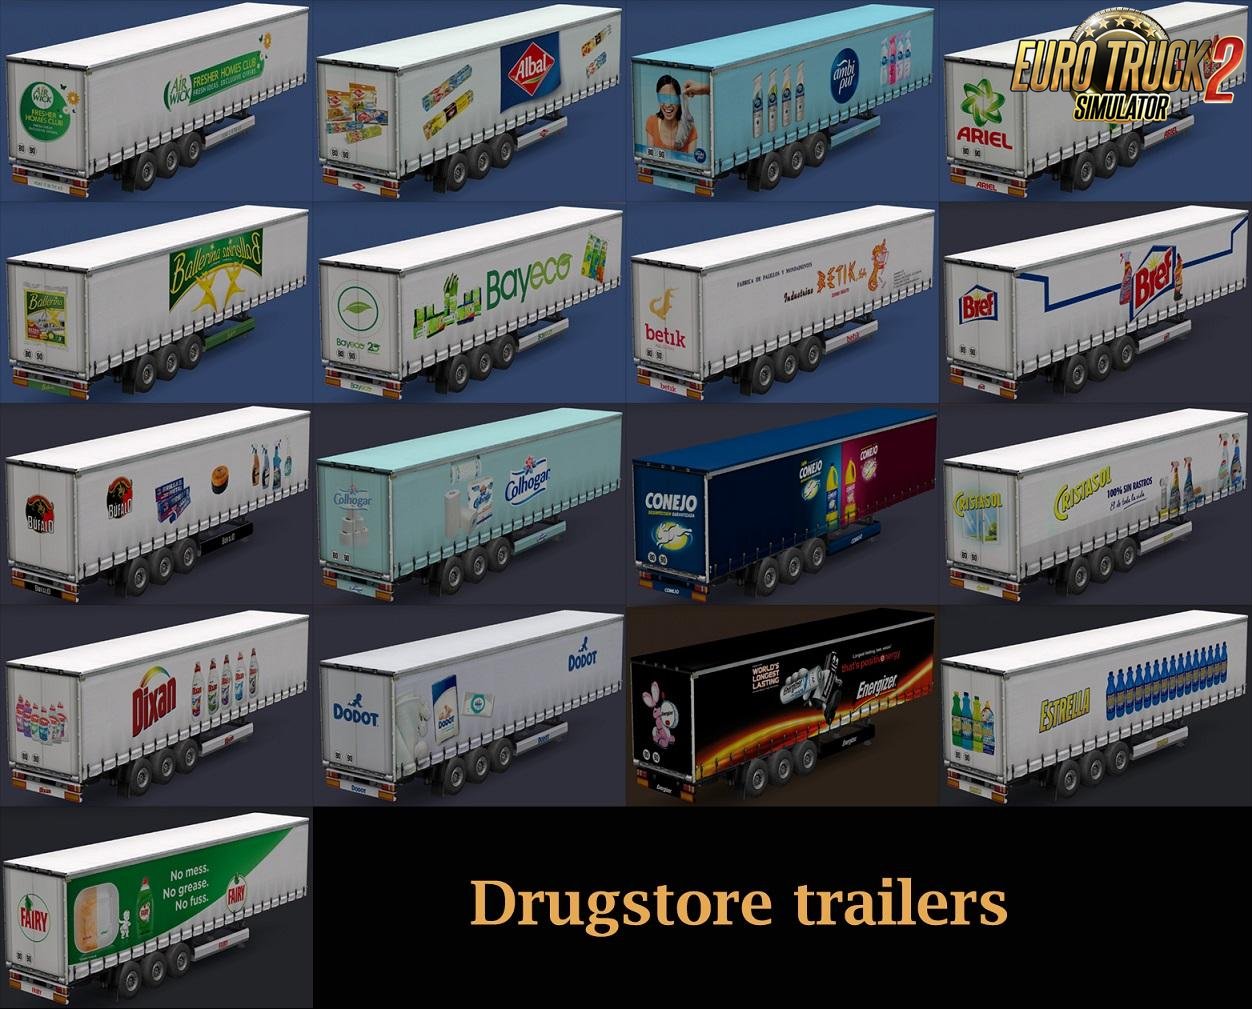 Drugstore Products Trailers v1.0 by Maryjm